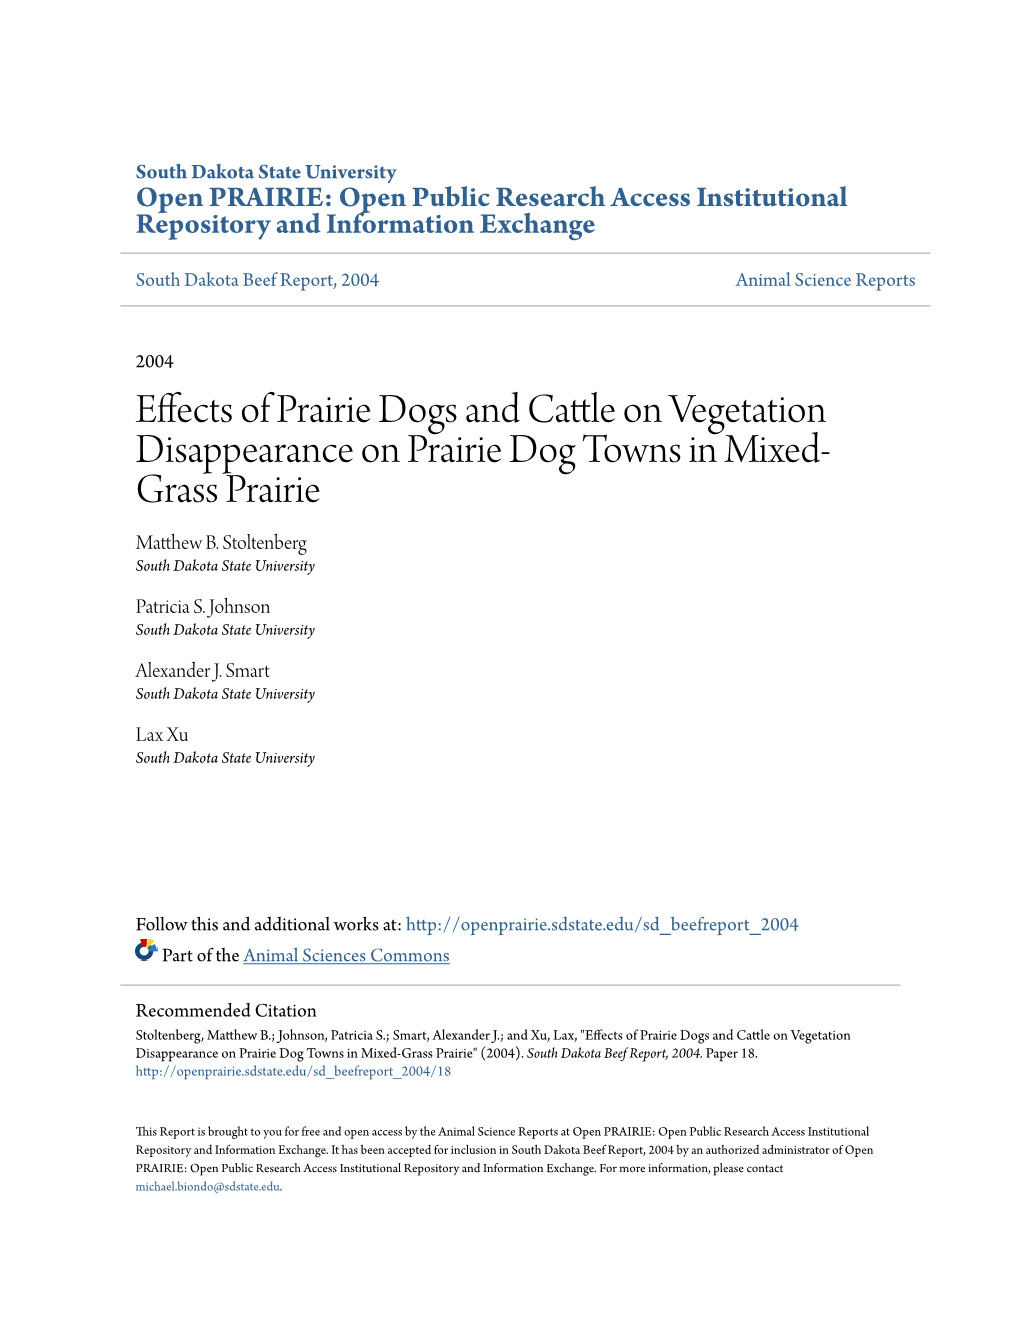 Effects of Prairie Dogs and Cattle on Vegetation Disappearance on Prairie Dog Towns in Mixed-Grass Prairie